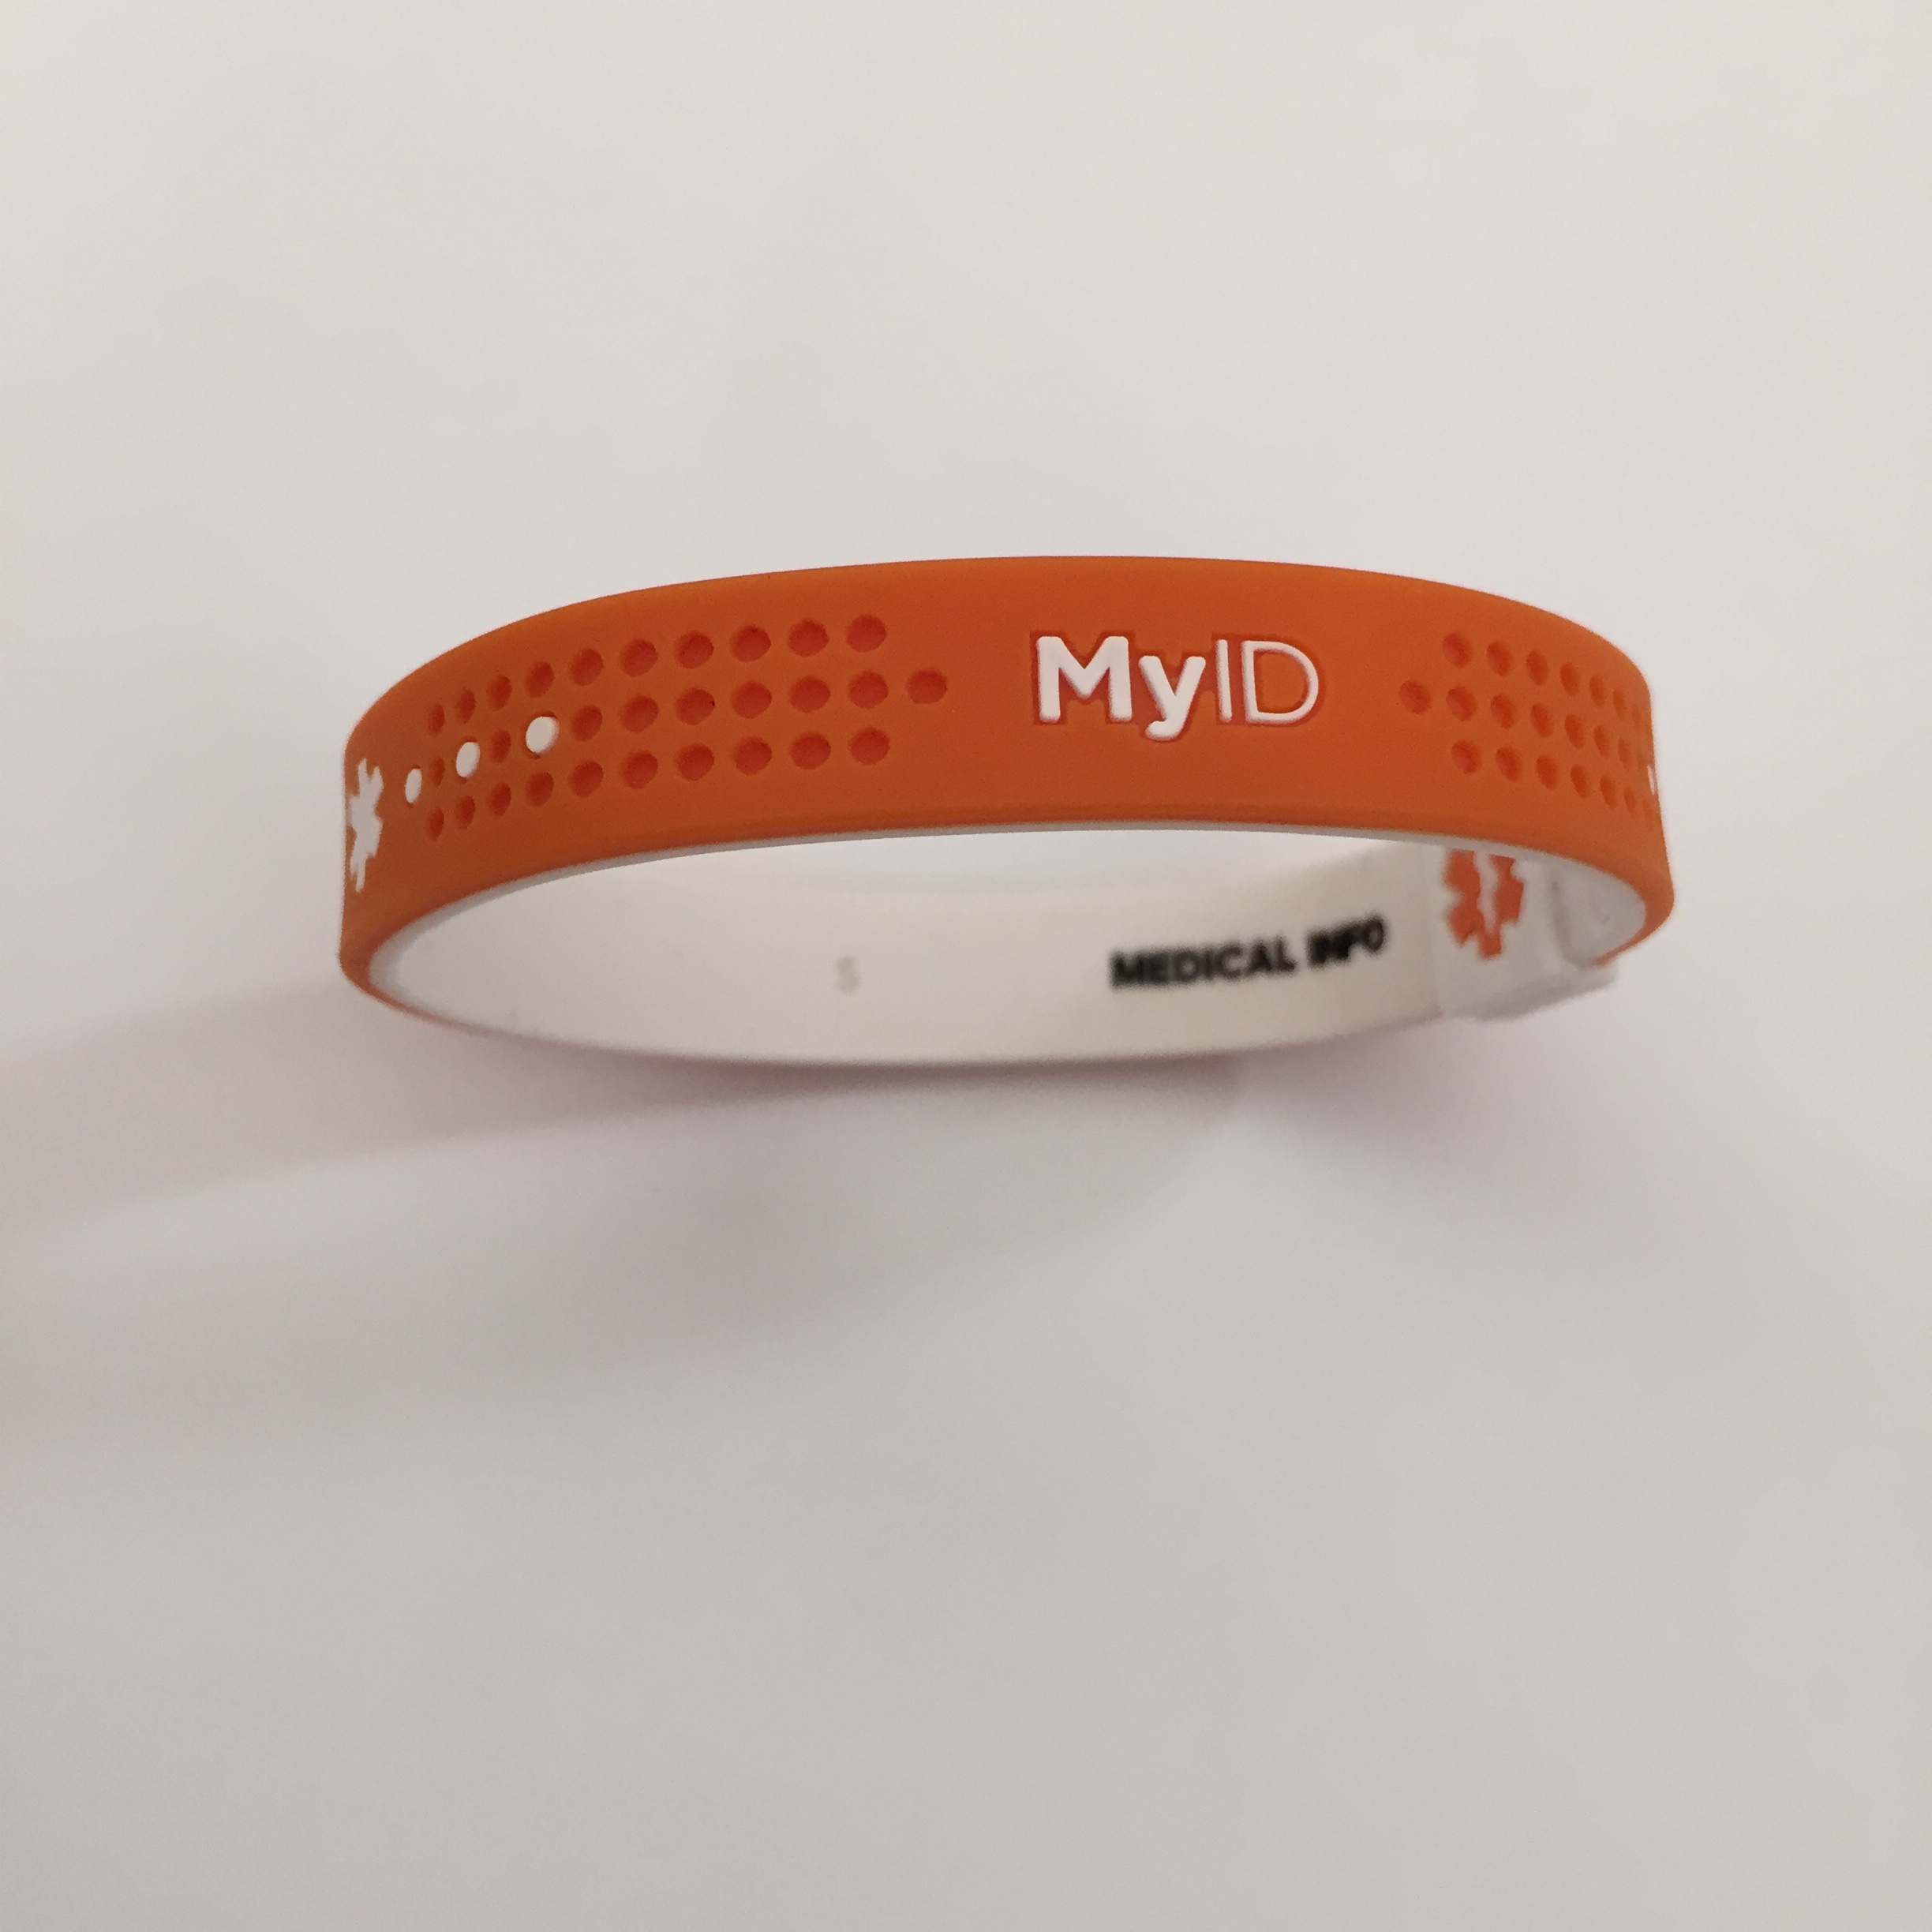 myID Emergency Identification Bracelet Review | PCMag